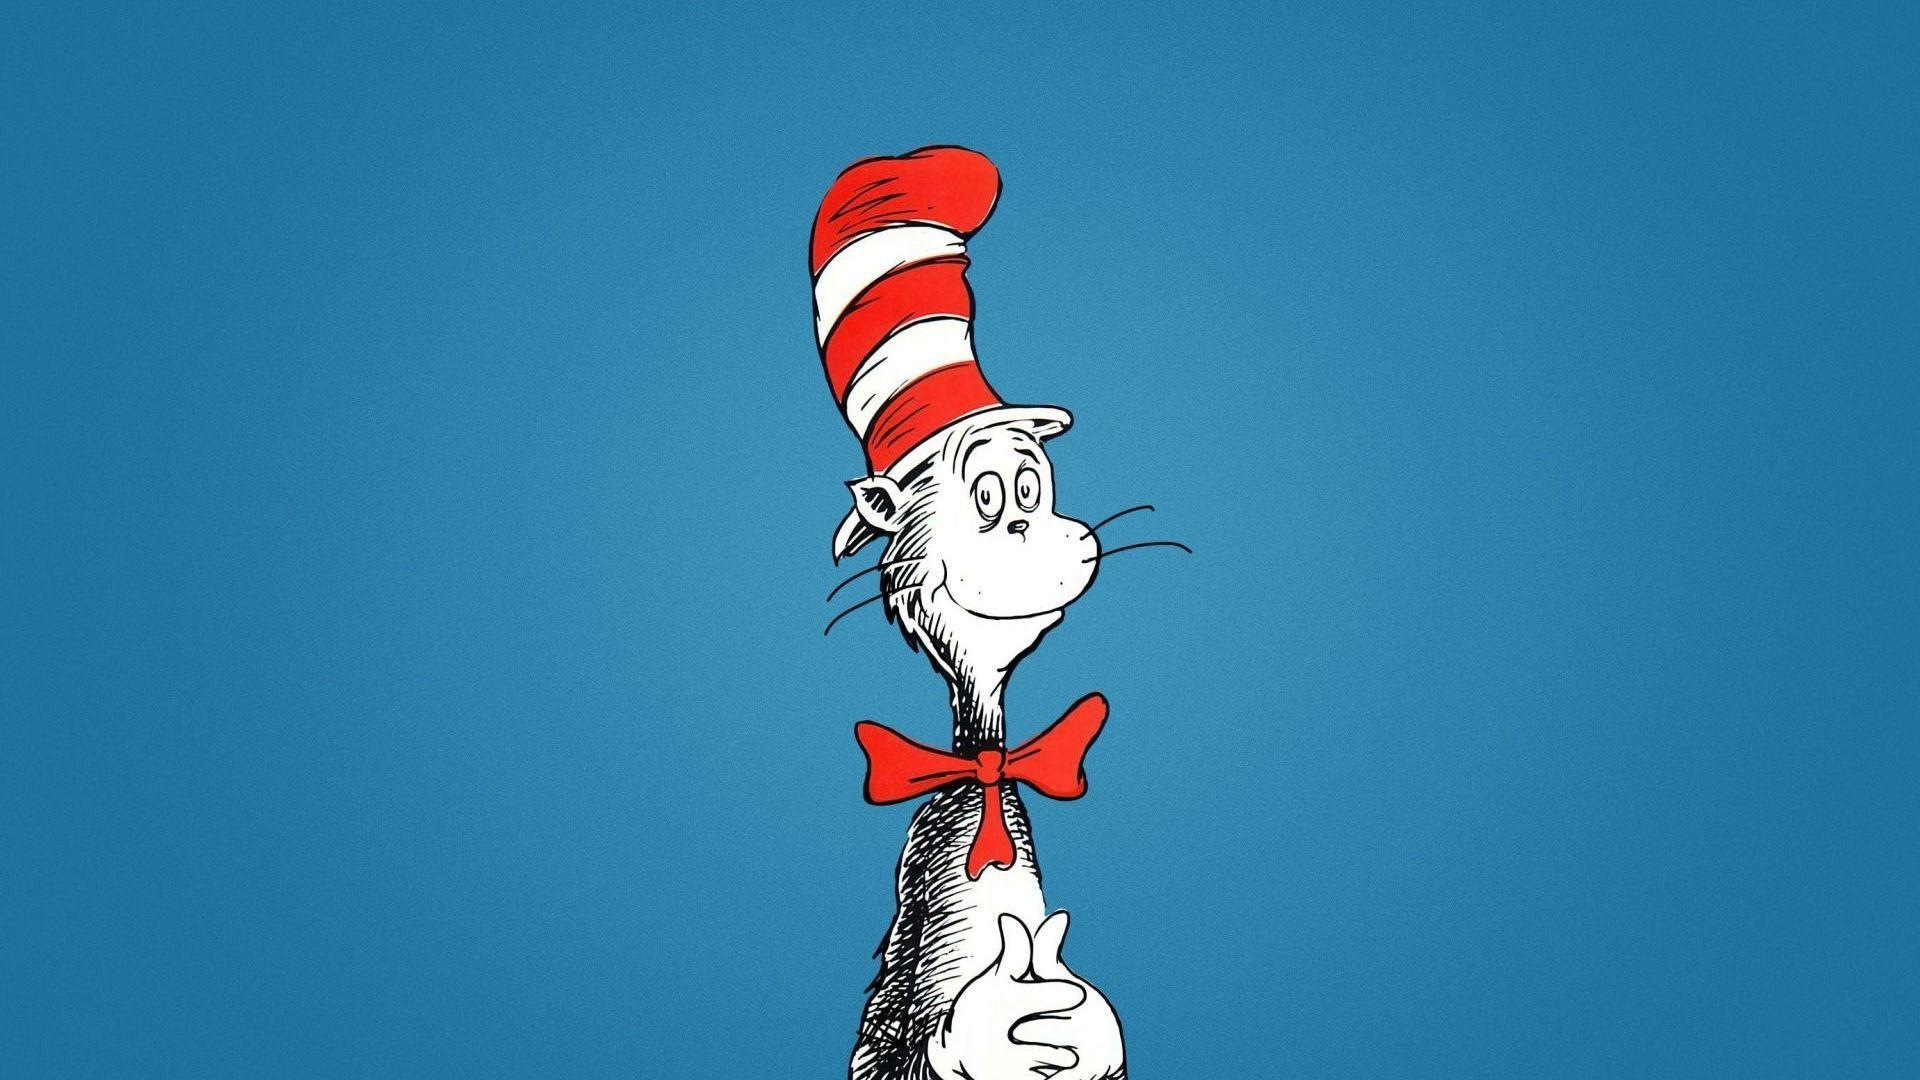 Living Books: The Cat in the Hat